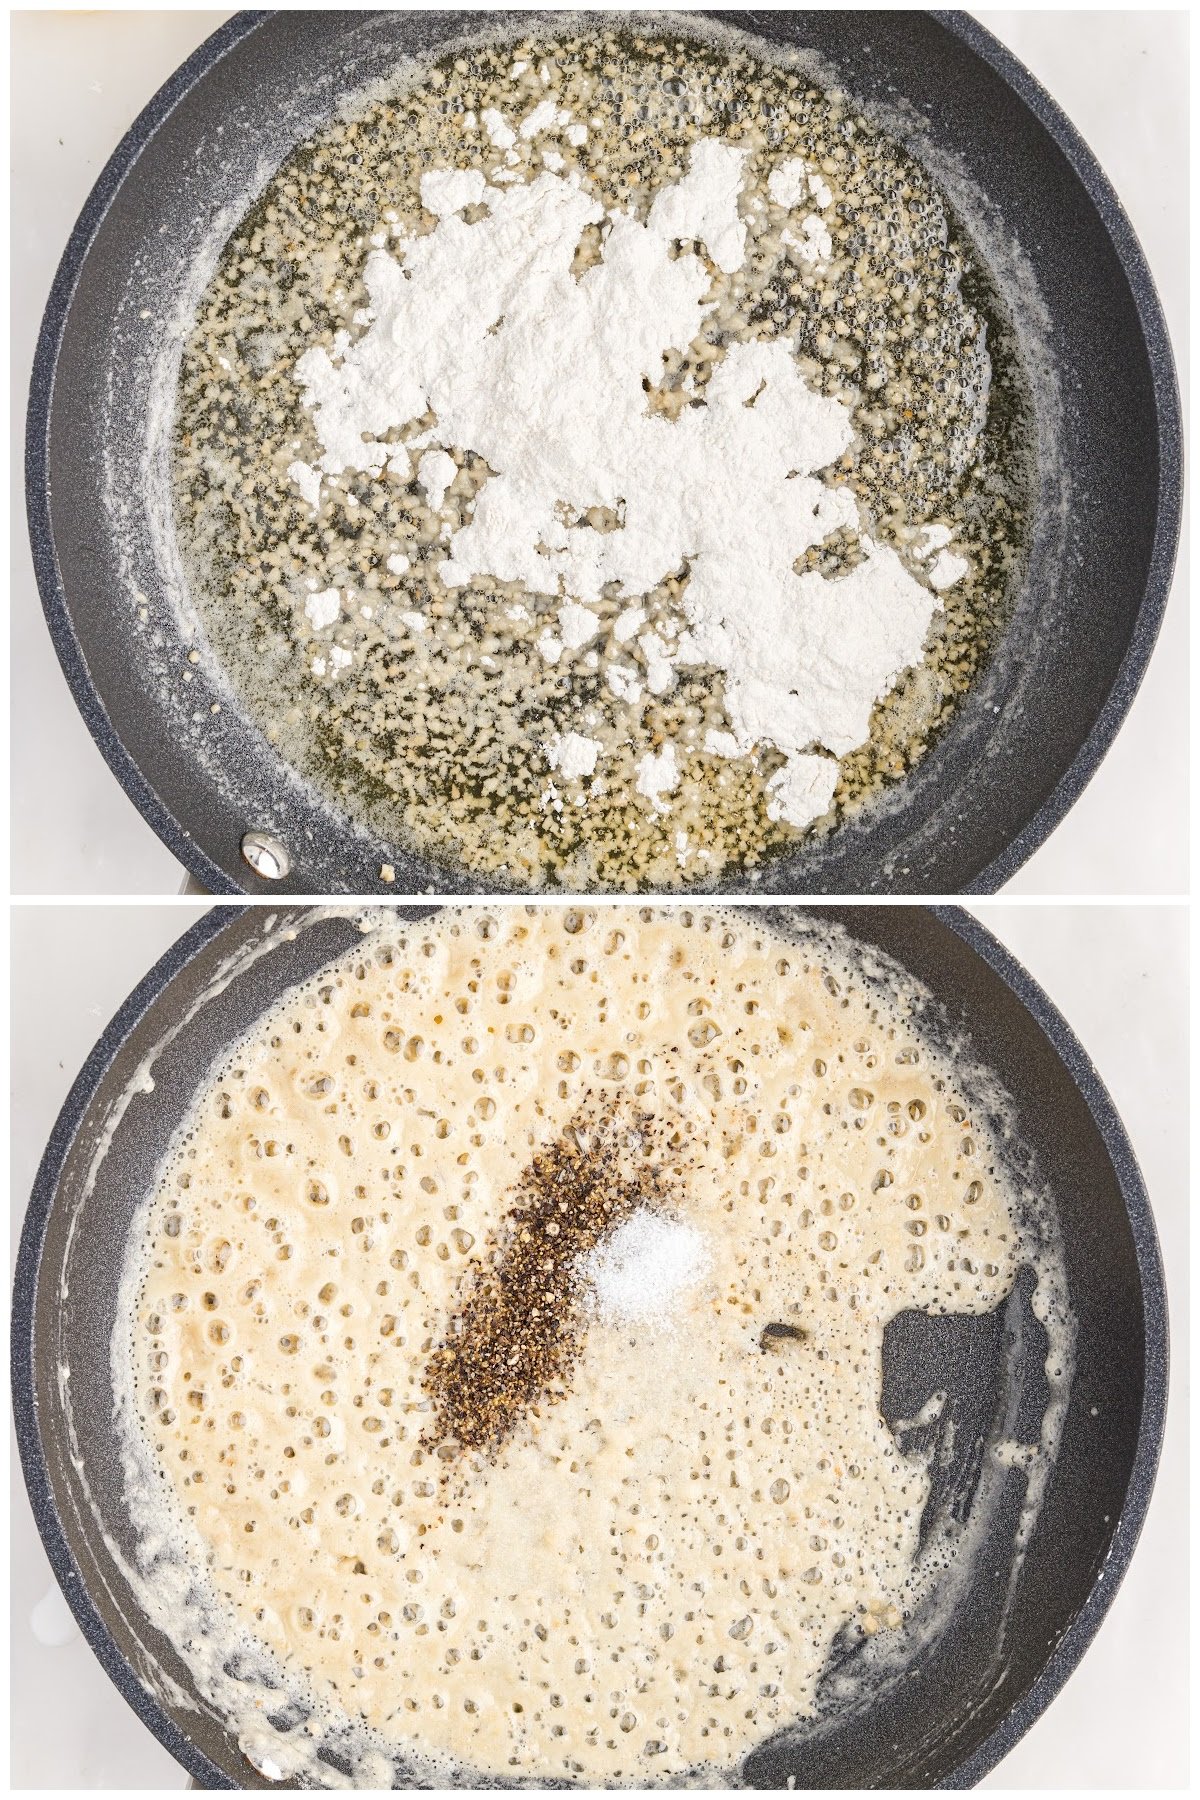 Two images of flour added to pan and salt and pepper added to mixture.